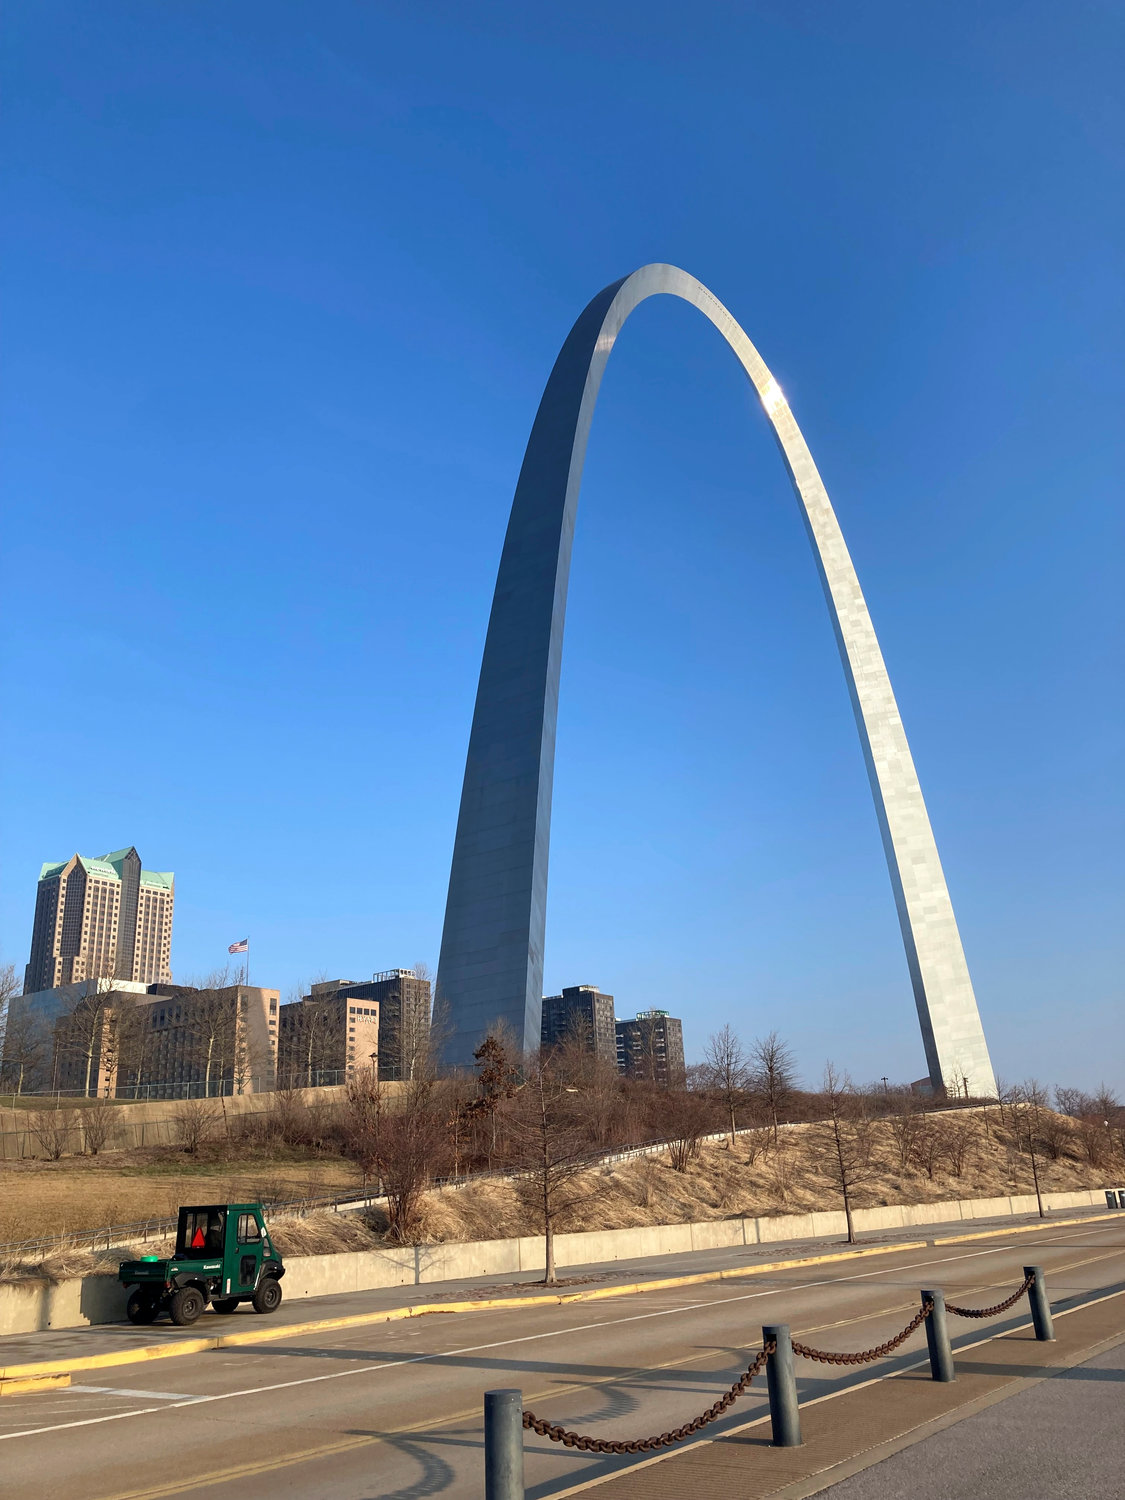 The Gateway Arch is seen, Thursday, March 3, 2022 in St. Louis. The Arch was built in the mid-1960s to withstand a strong earthquake, but many other structures in the central U.S. are not. That's concerning because the active New Madrid Fault is centered in southeastern Missouri, and experts say there's up to a 10% chance of a magnitude 7.0 earthquake or greater in the region within the next 50 years. (AP Photo/Jim Salter)